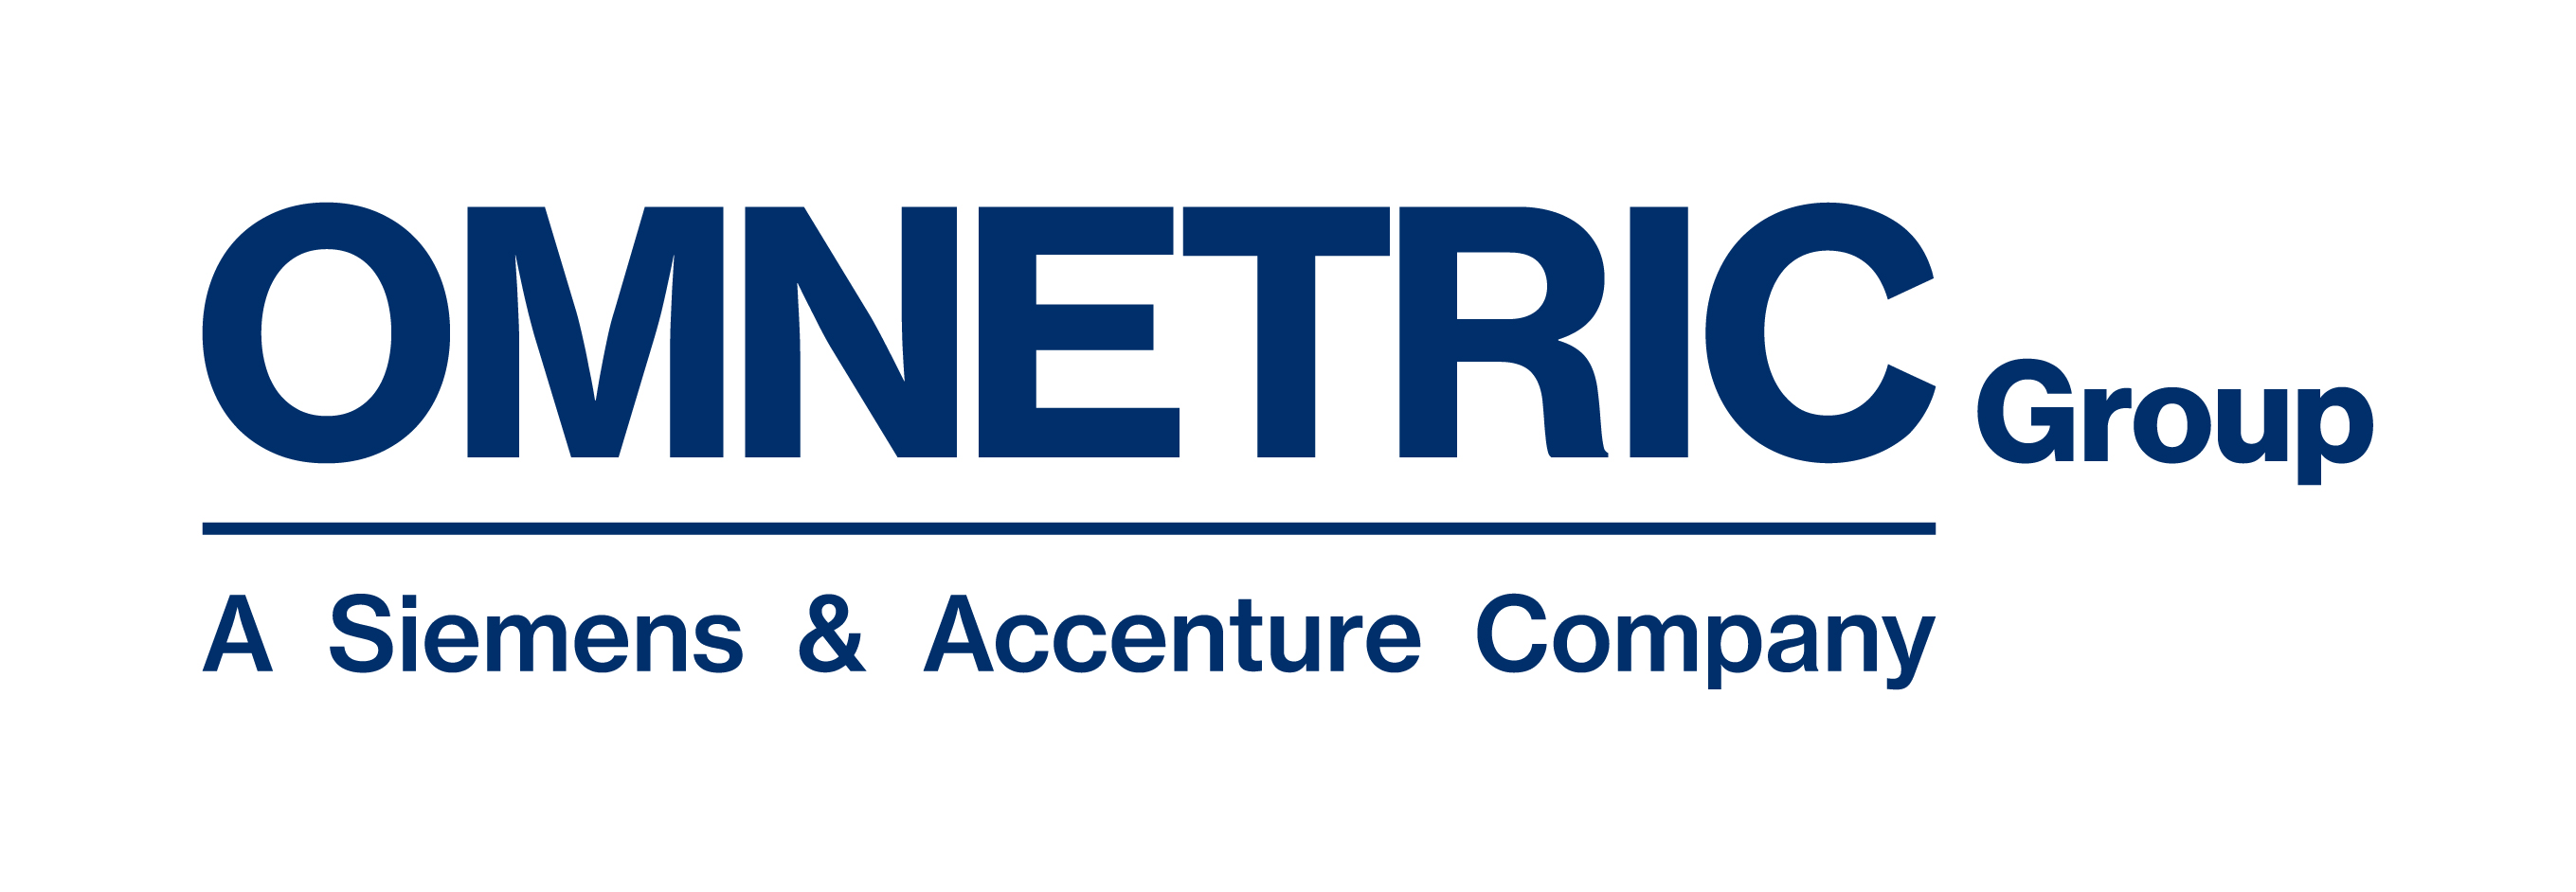 OMNETRIC Group